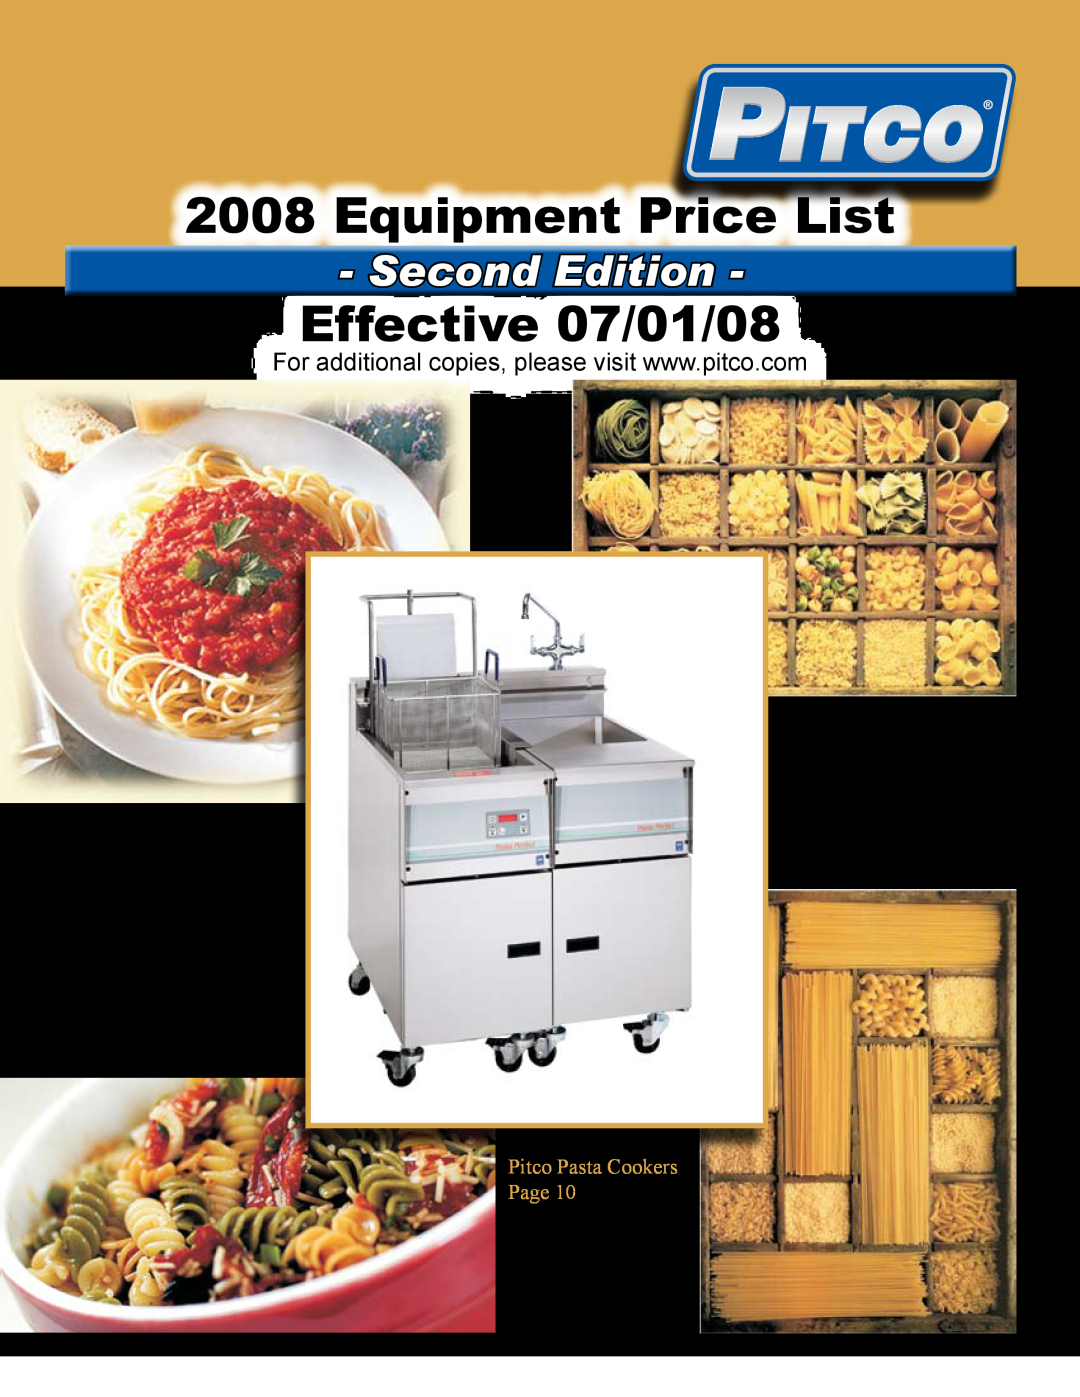 Pitco Frialator SG14DI manual Equipment Price List, Effective 07/01/08, Second Edition, Pitco Pasta Cookers Page 